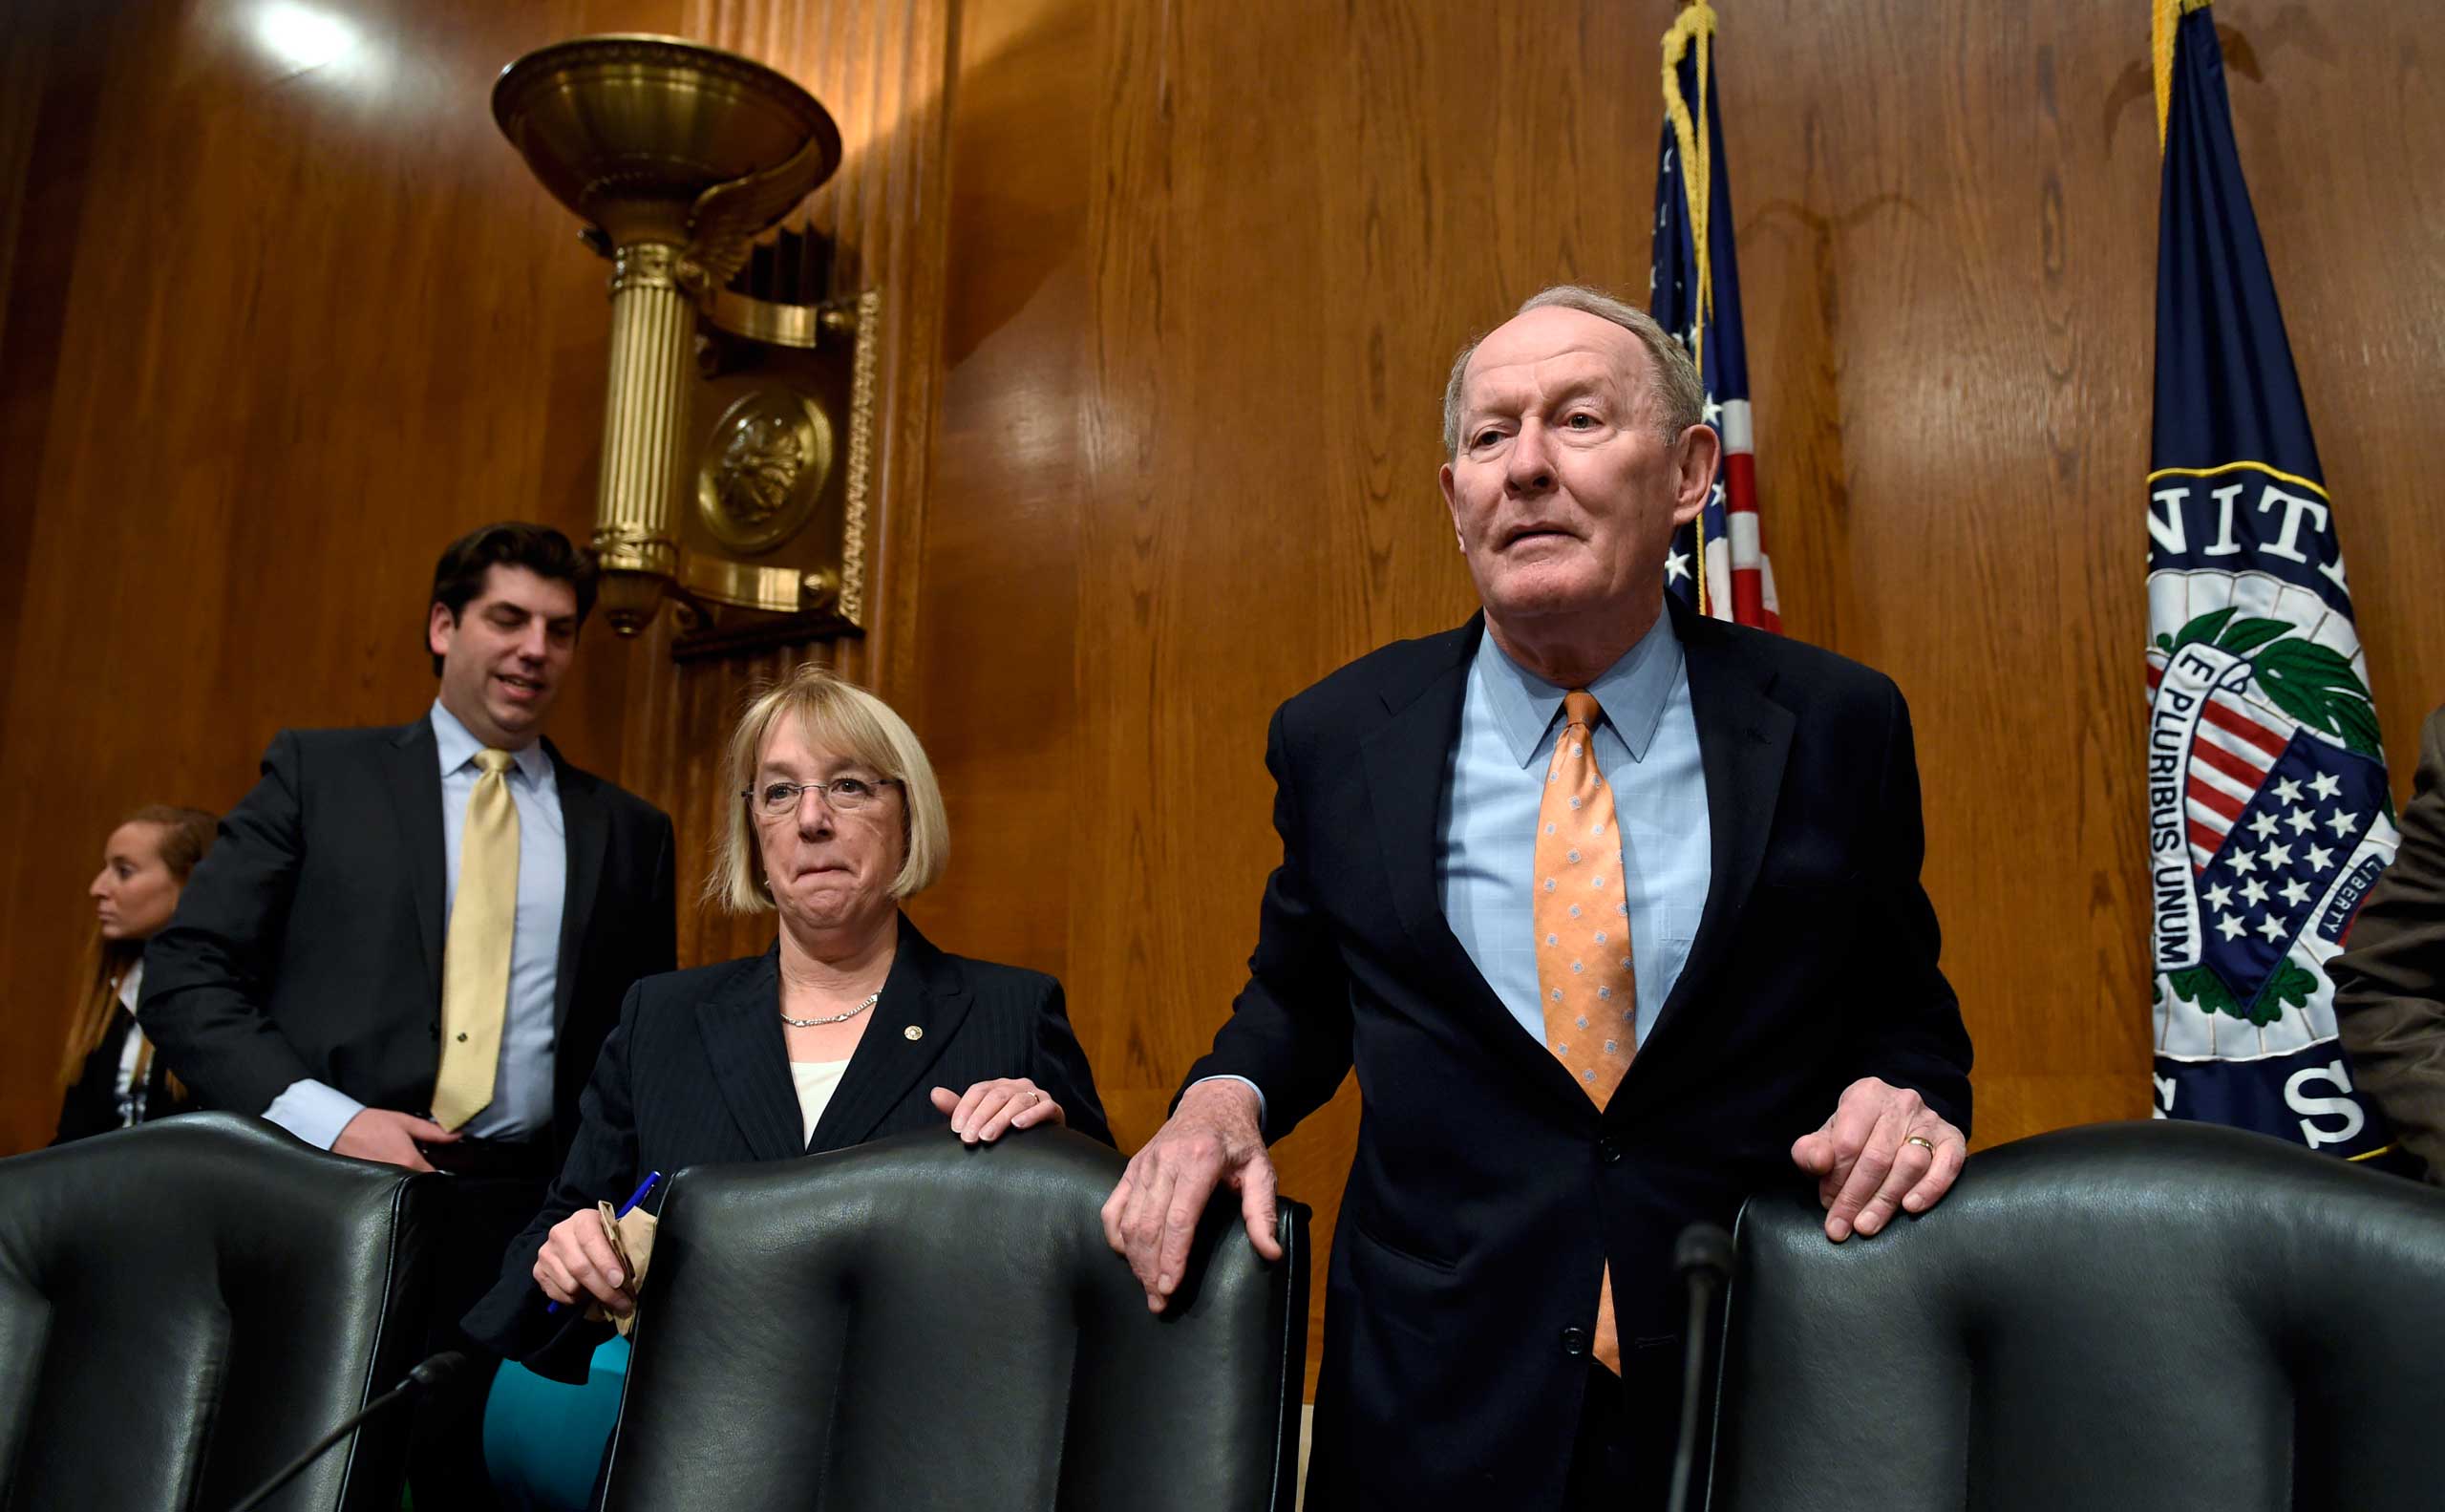 Senate Health, Education, Labor and Pensions Committee Chairman Sen. Lamar Alexander, R-Tenn., right, and the committee's ranking member Sen. Patty Murray, D-Wash., arrive on Capitol Hill in Washington, Wednesday, Jan. 21, 2015, for the committee's hearing looking at ways to fix the No Child Left Behind law. (Susan Walsh&mdash;AP)